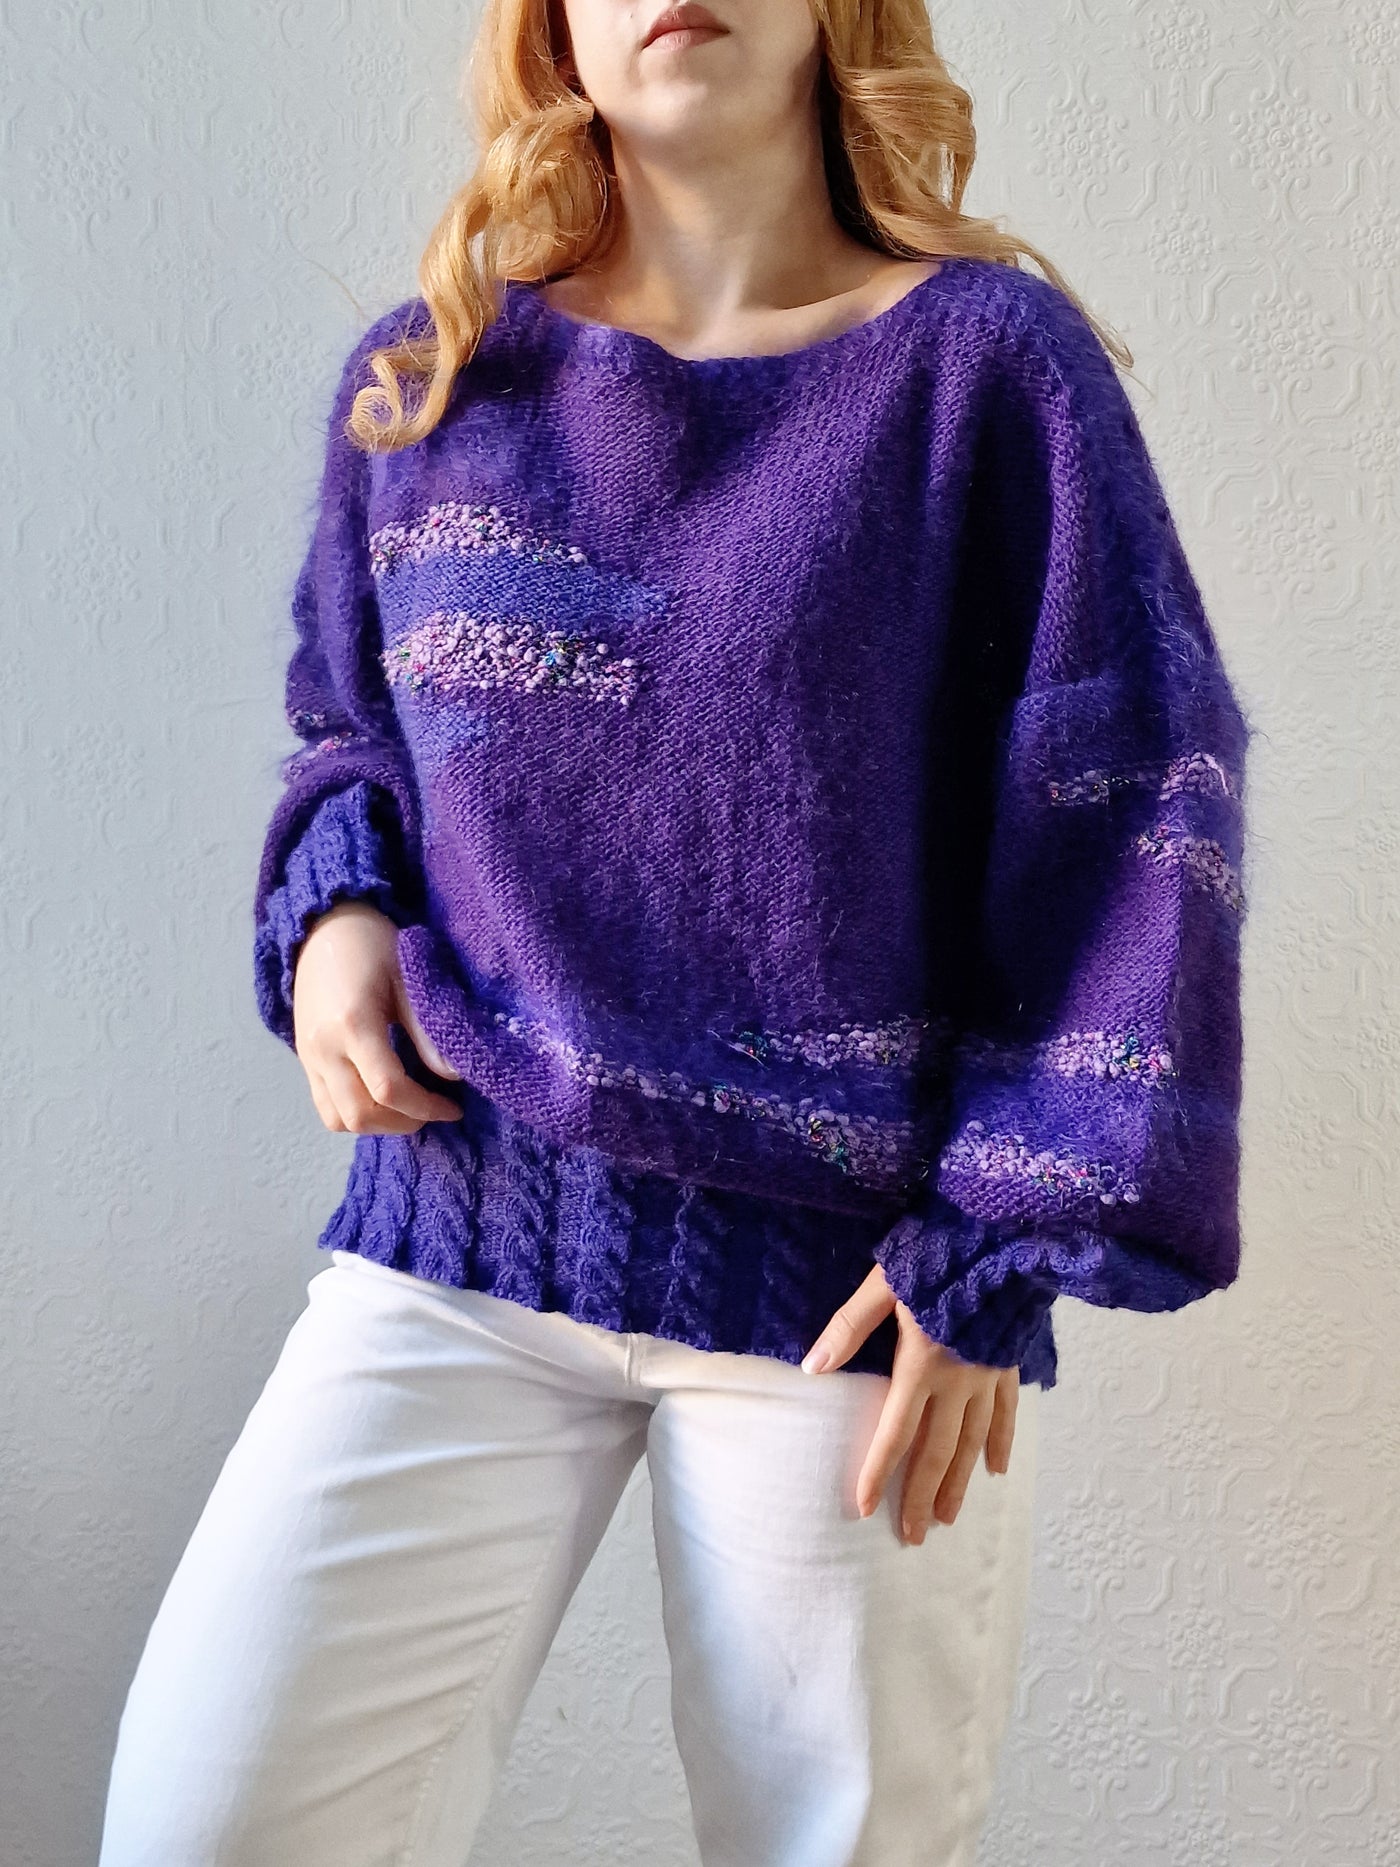 Vintage 80s Deep Purple Mohair Jumper with Boat Neck - XL